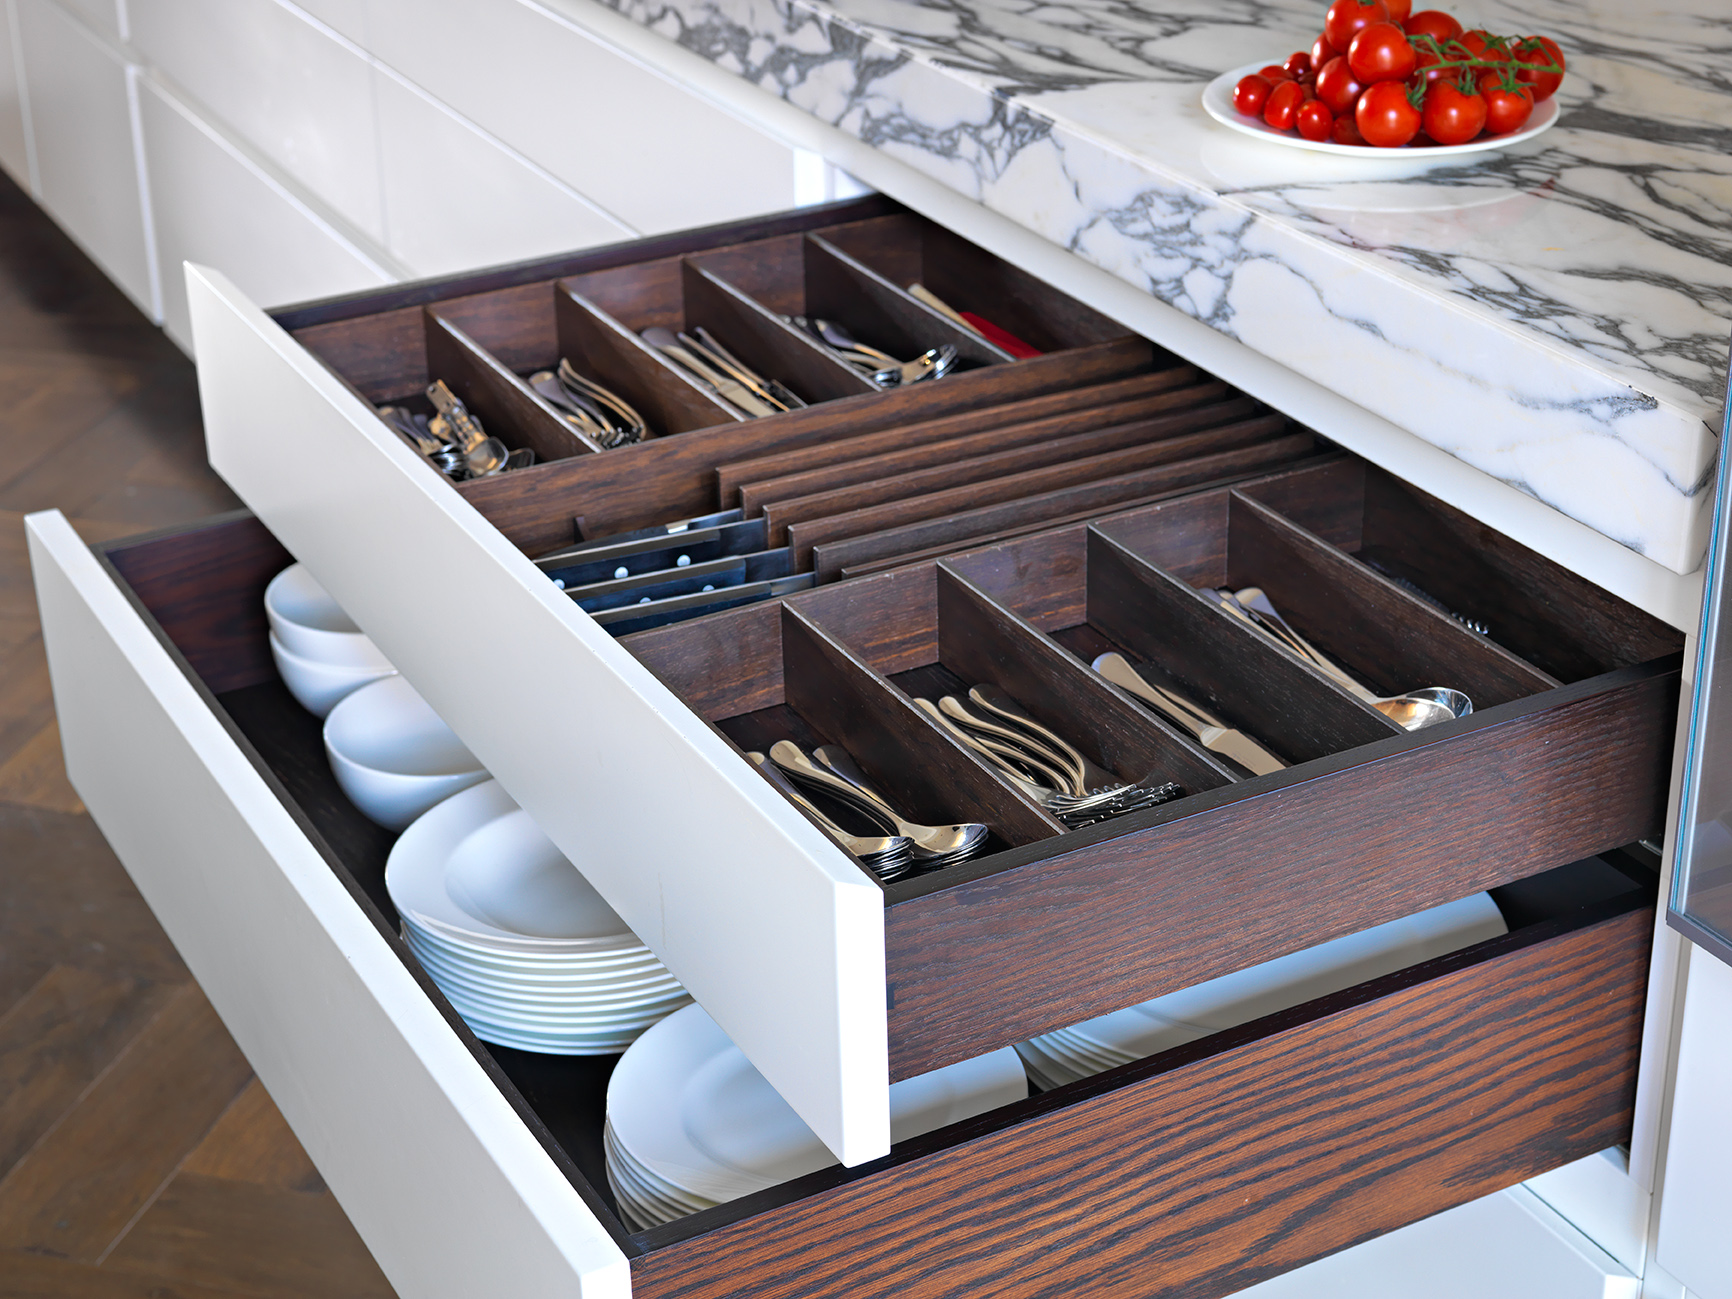 Stained oak cutlery and crockery drawers by Williams Ridout